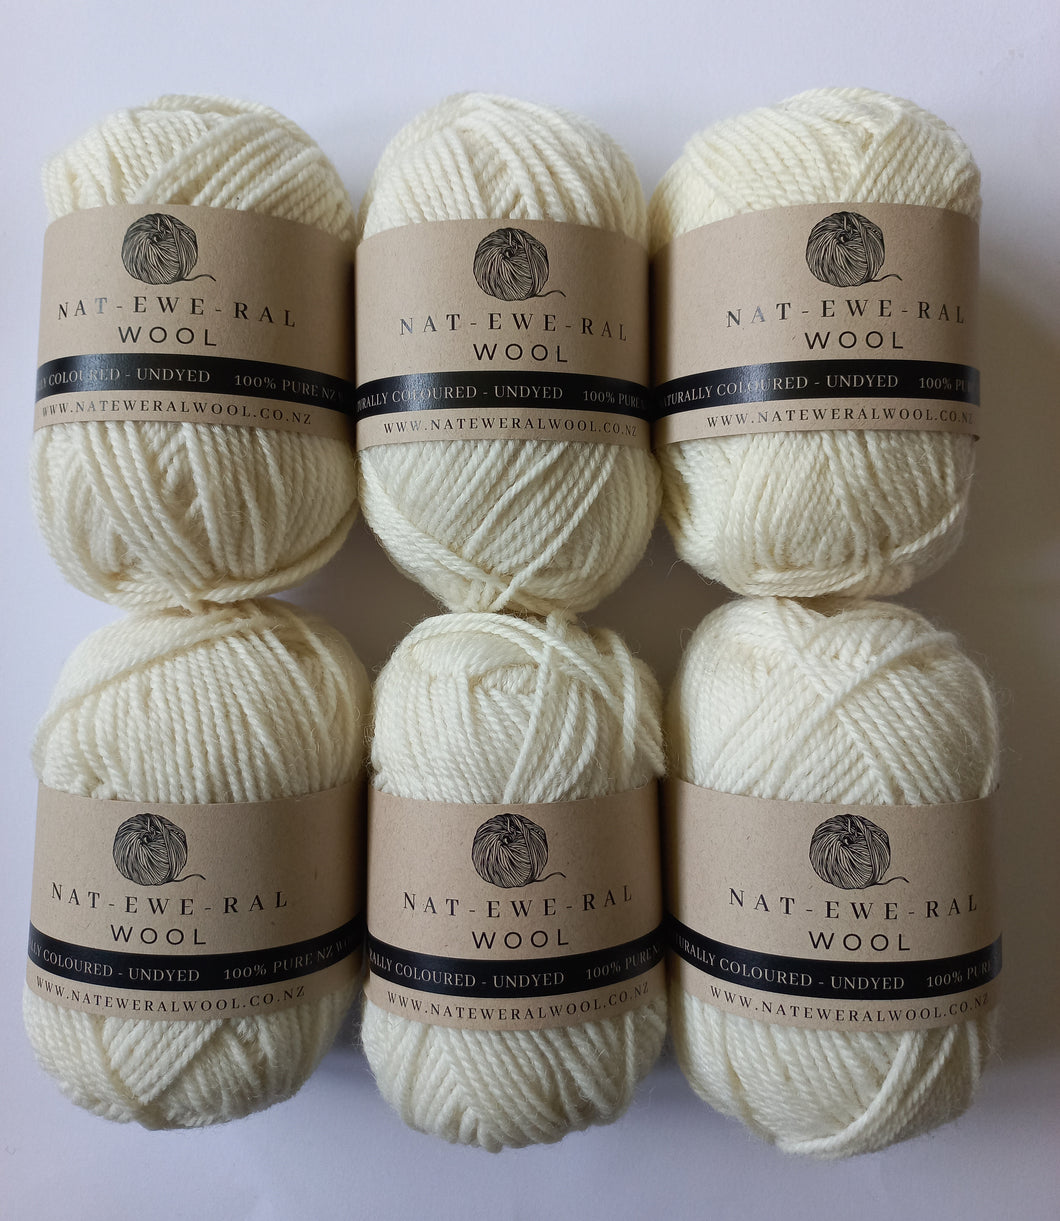 Undyed Natural Coloured White Yarn - 6 pack